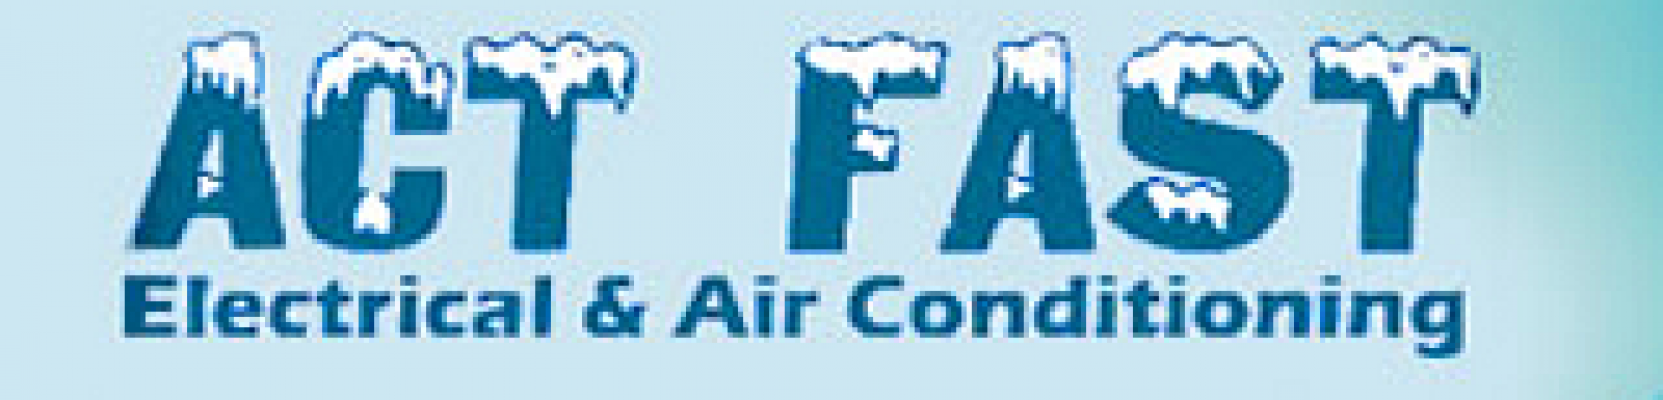 Ducted Air Conditioning North Brisbane